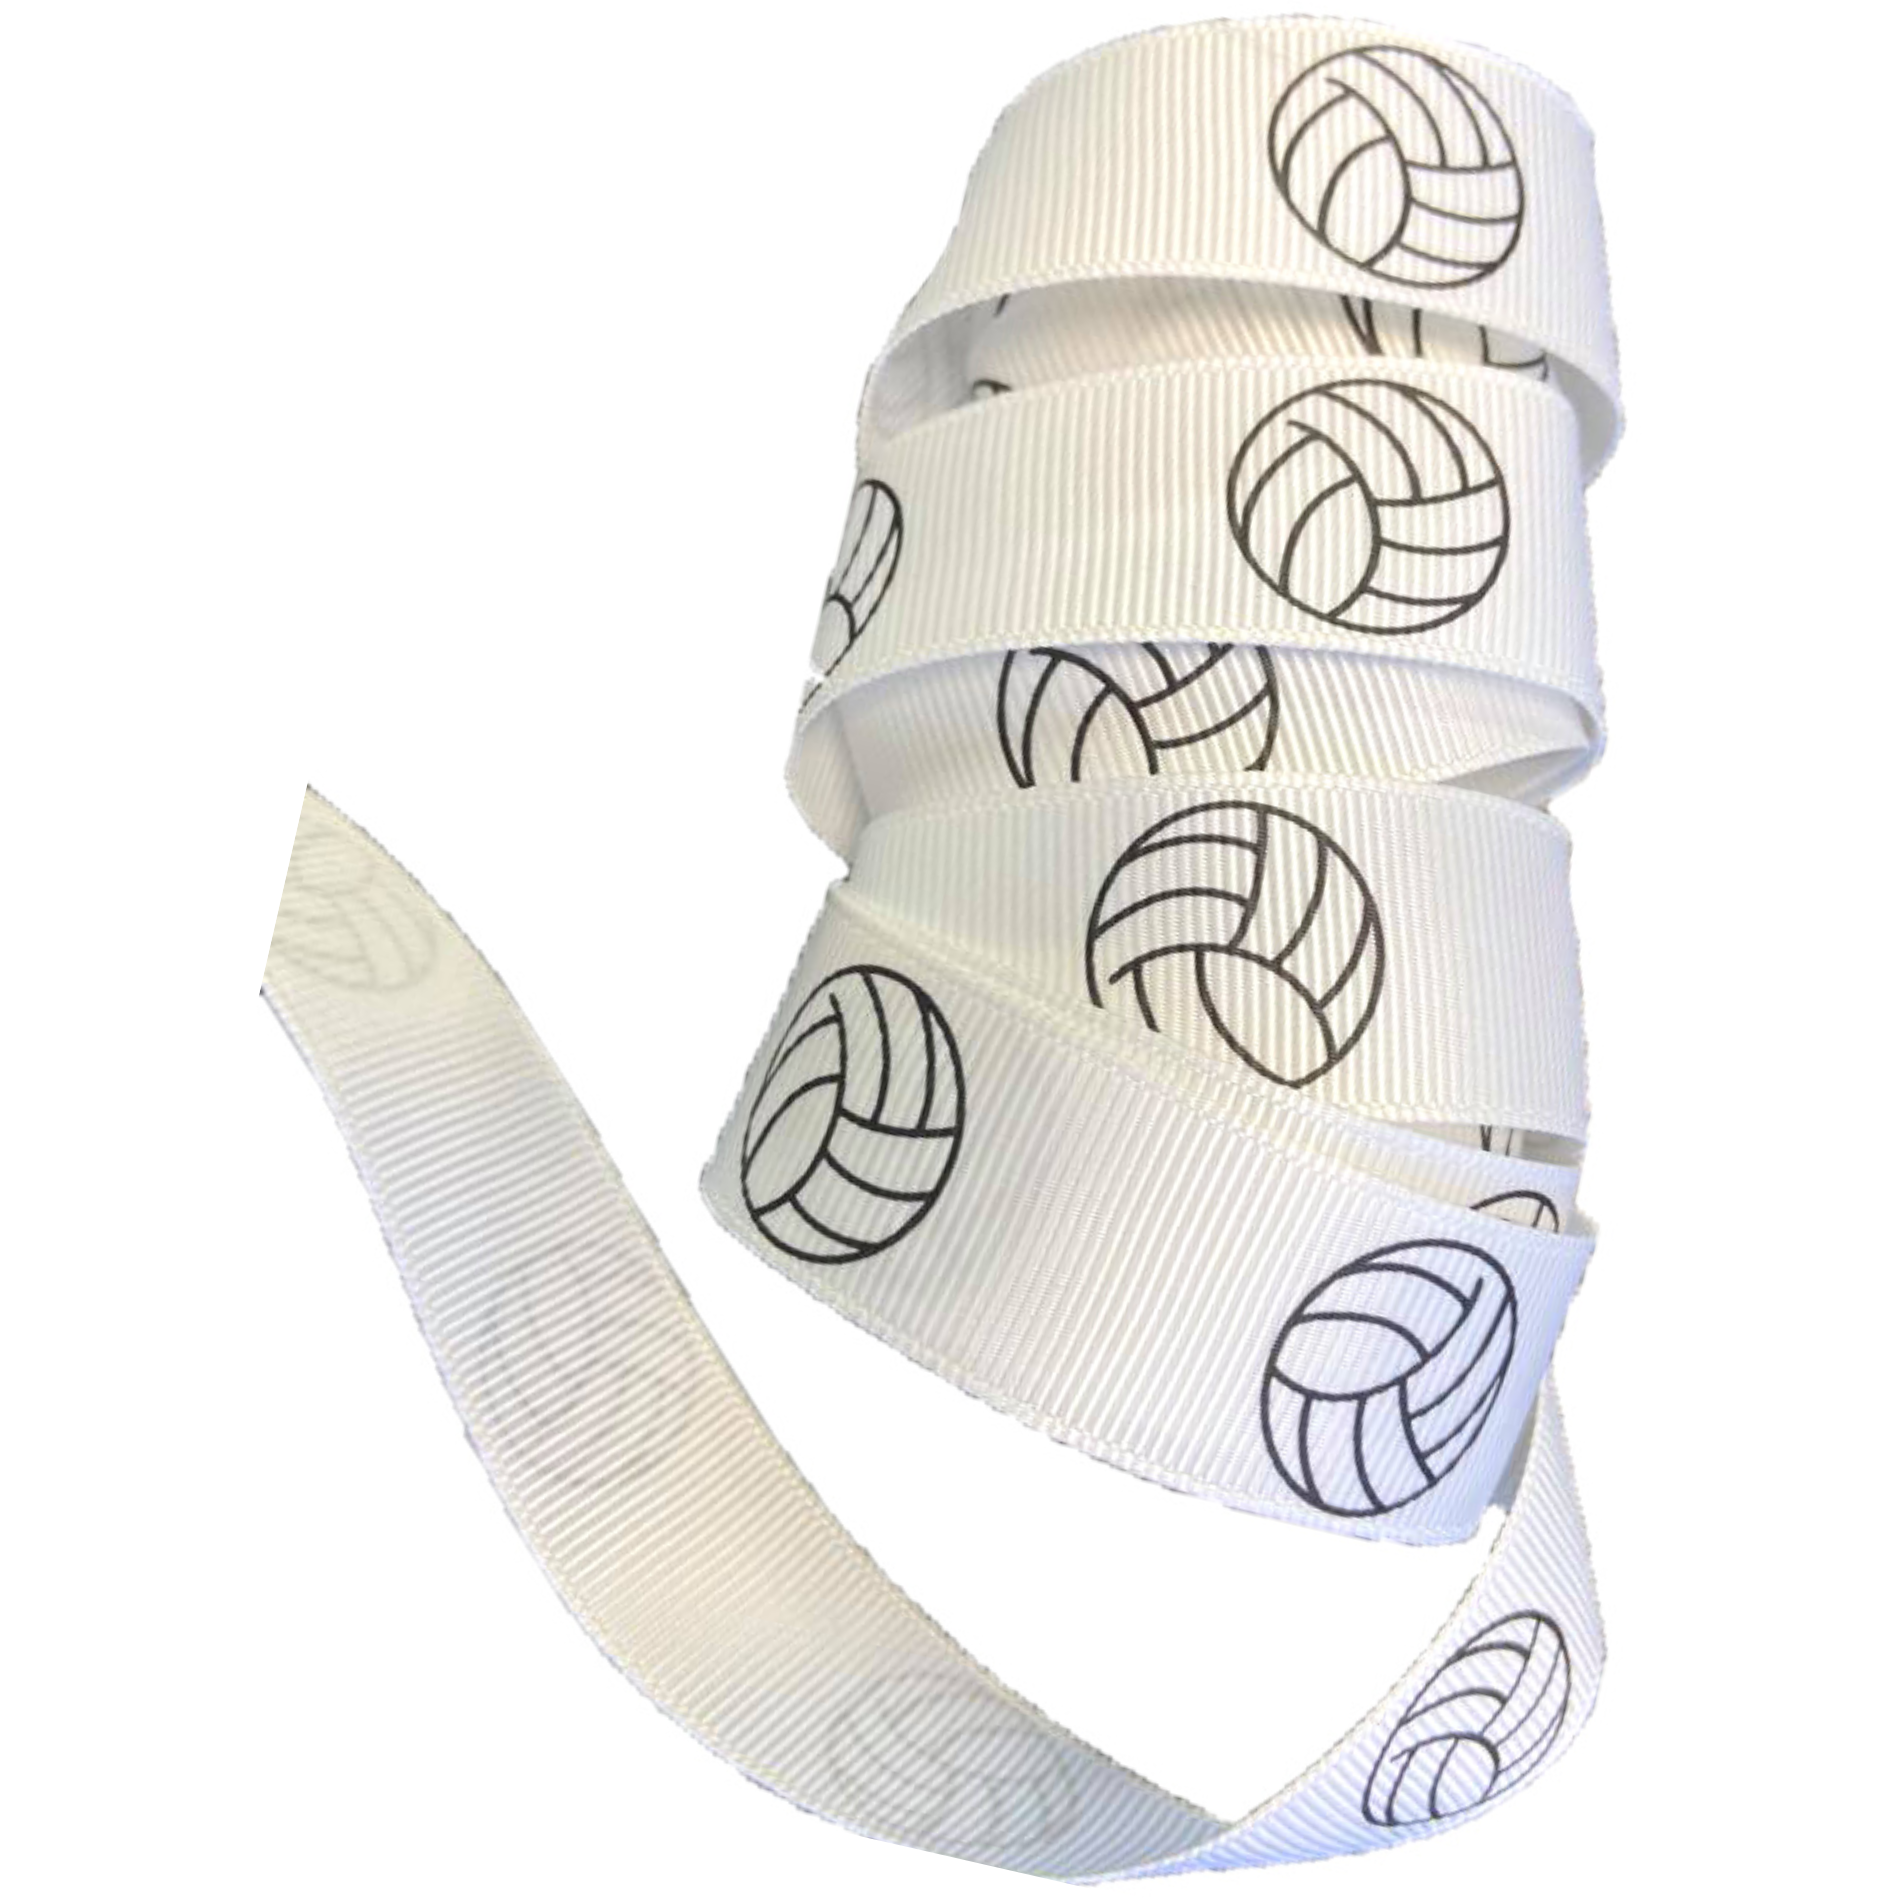 Volleyball Ribbon White 5 Yards to Use for Ponytail Holders Streamers on Your Bag to Show Spirit or Crafts | Kenz Laurenz